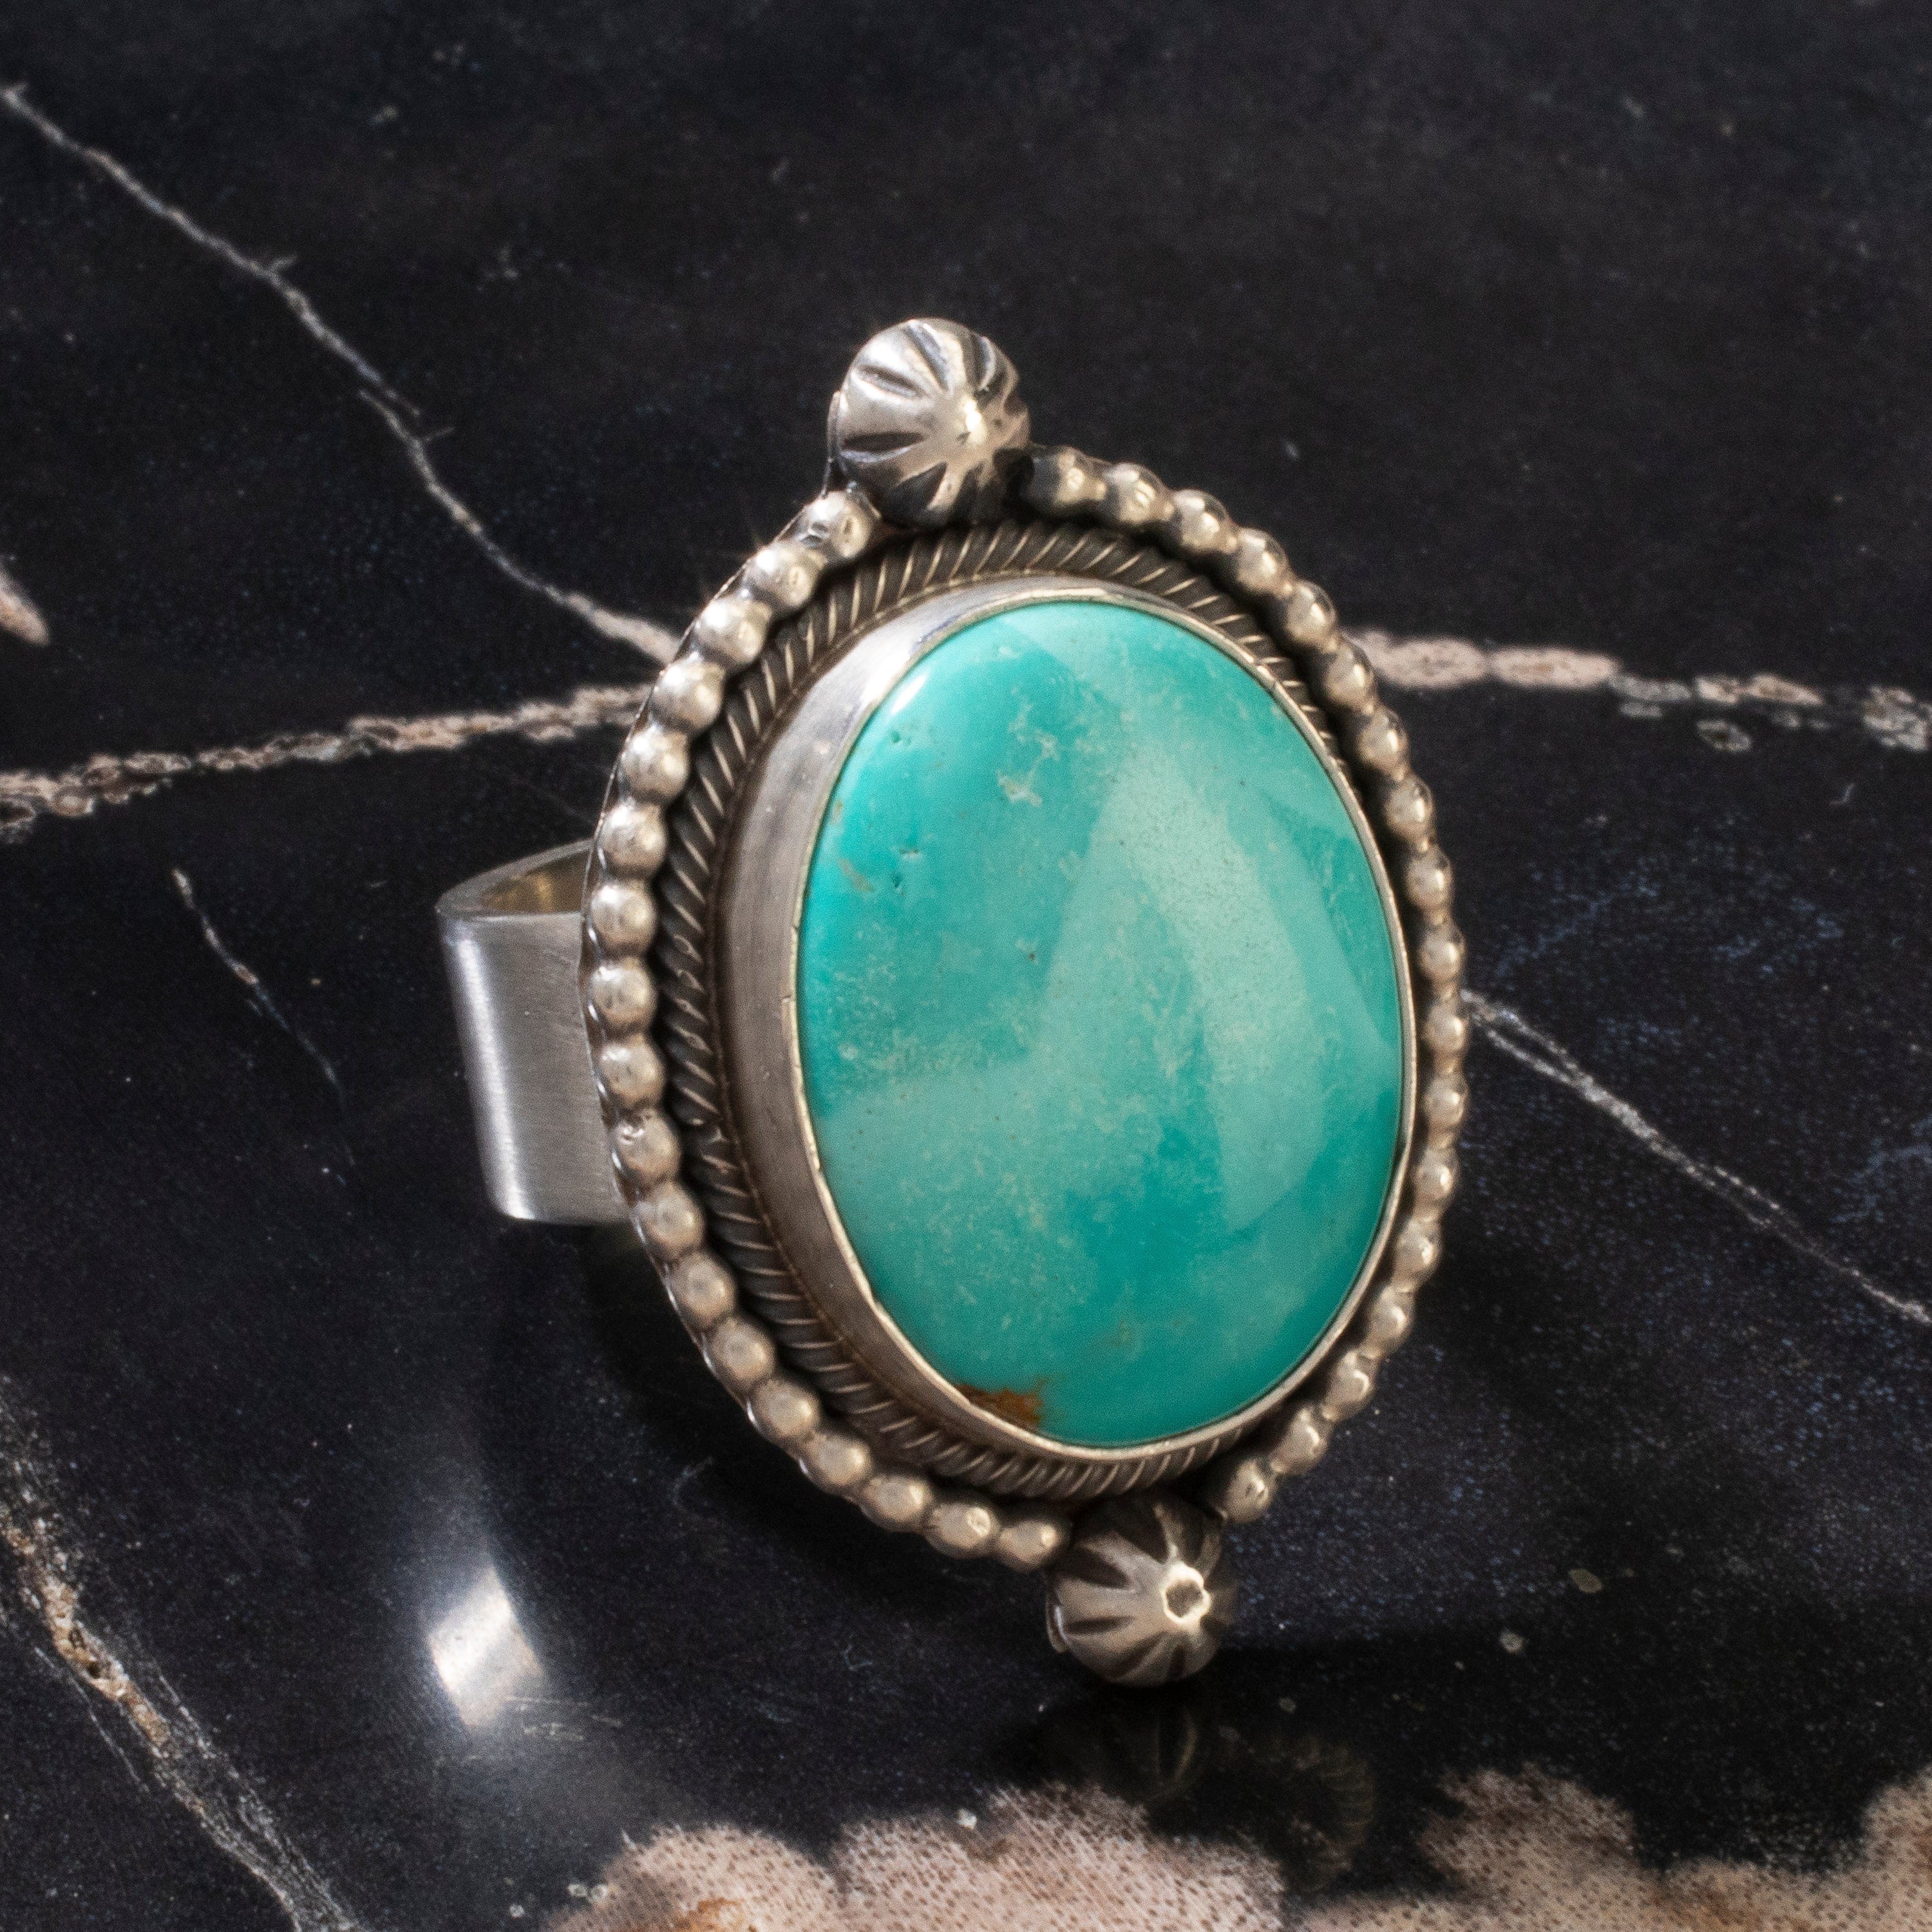 Kalifano Native American Jewelry 7 Scott Skeets Royston Turquoise Navajo USA Native American Made 925 Sterling Silver Ring NAR900.034.7